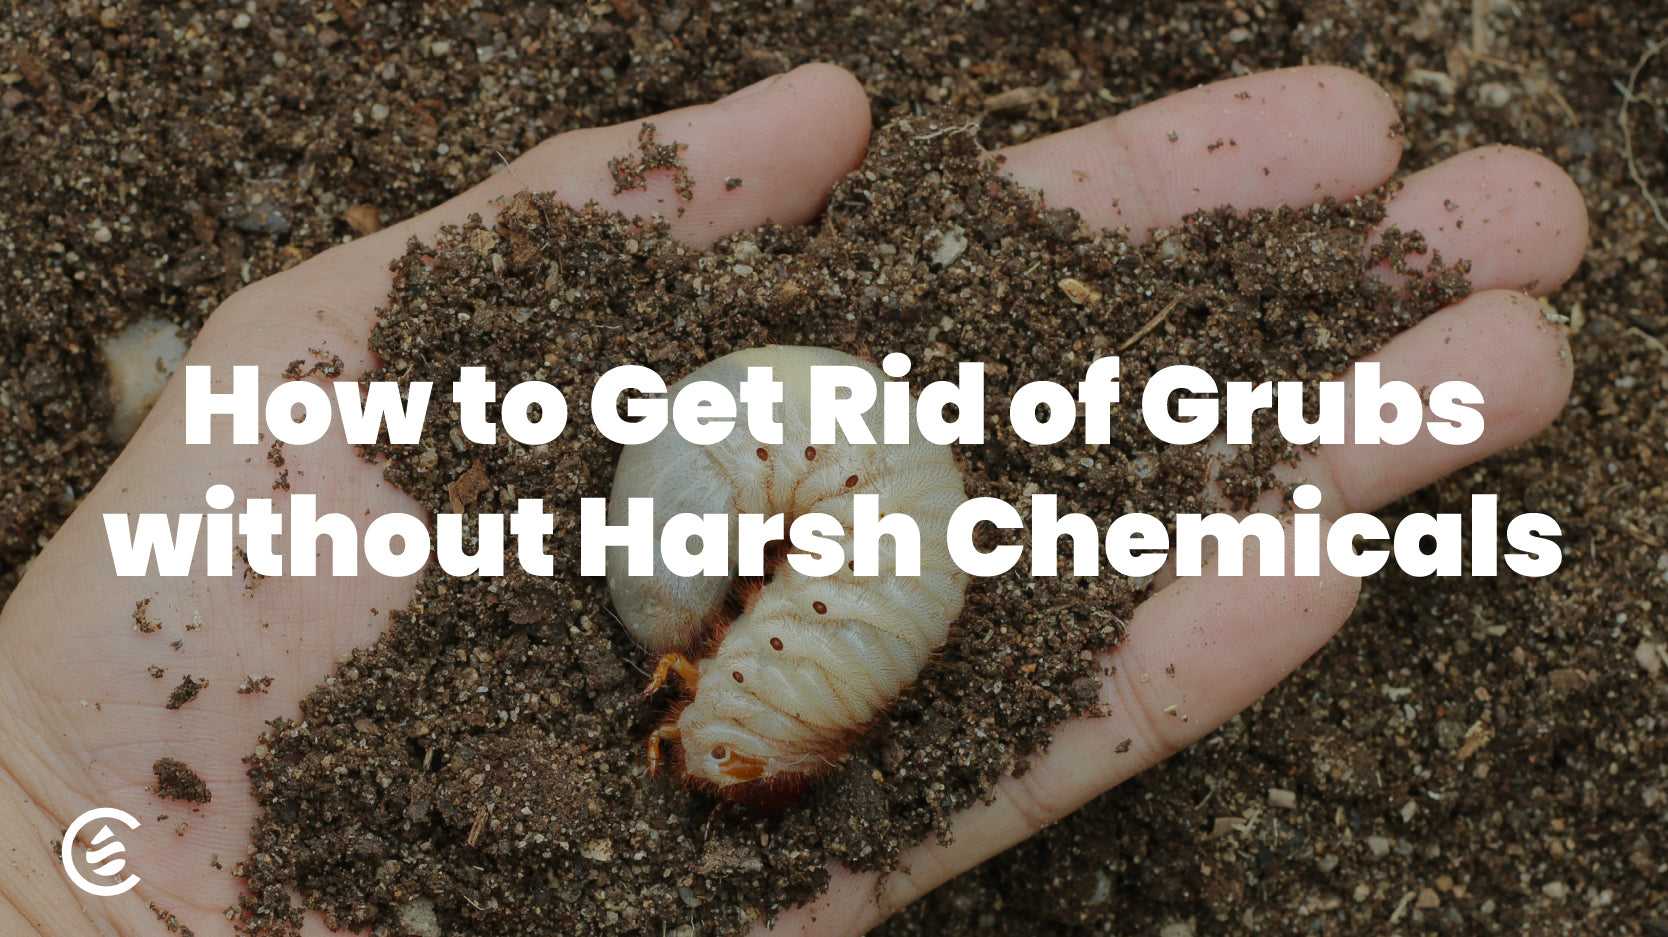 Cedarcide Blog Post Image, How to Get Rid of Grubs Naturally